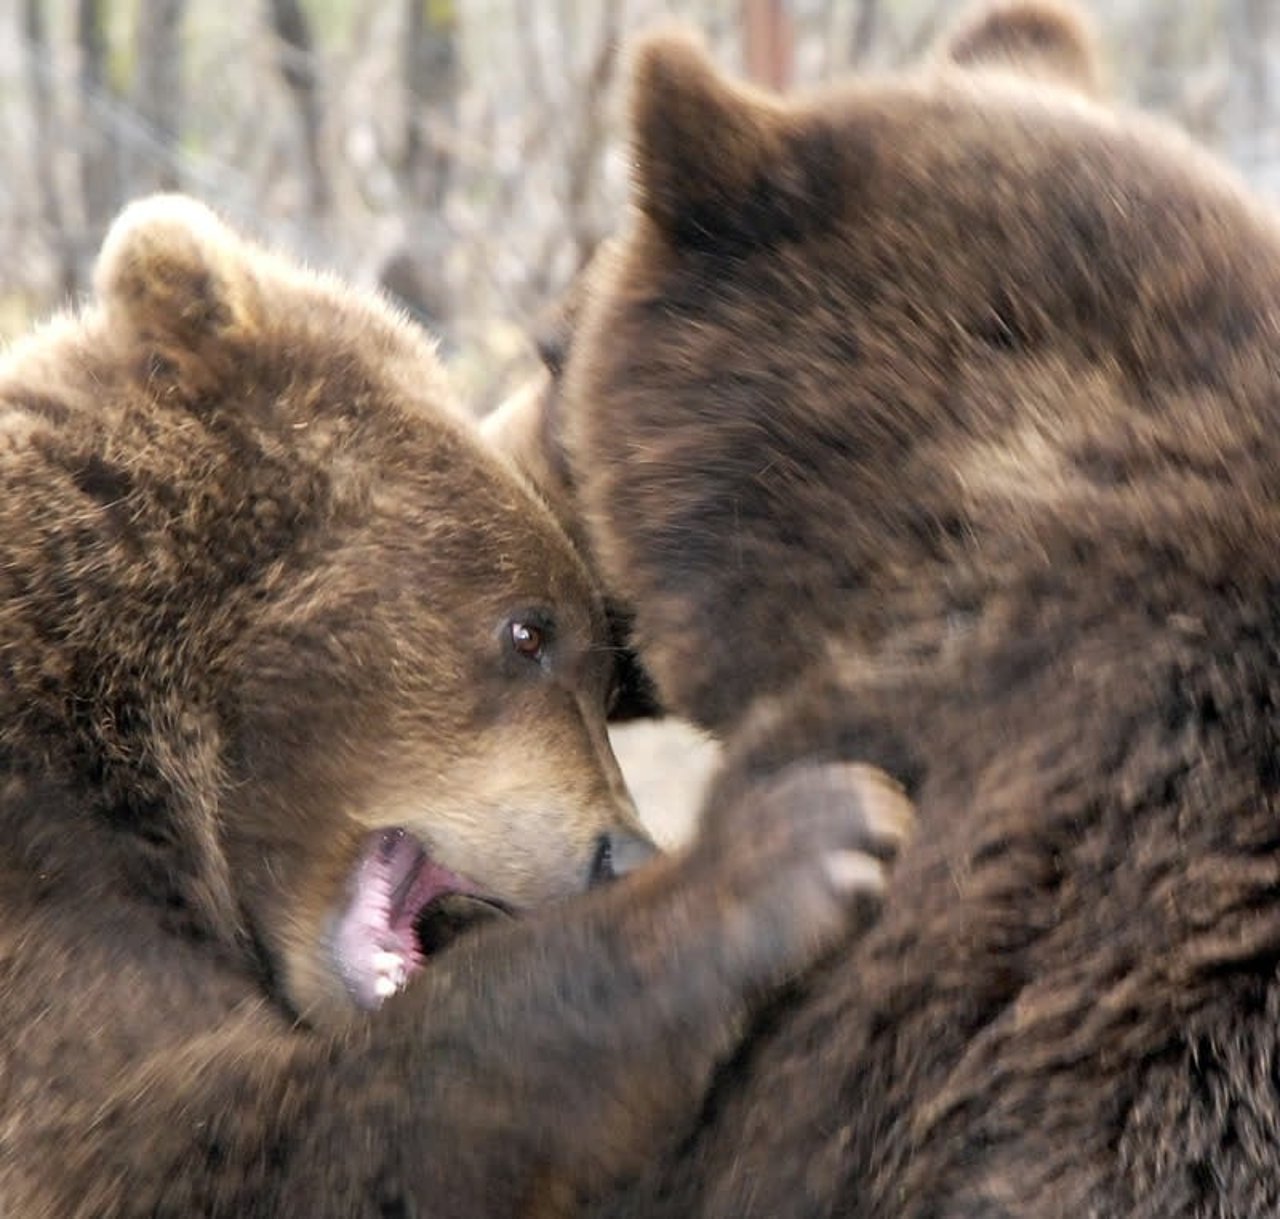 grizzly_bears_credit_world_animal_protection_sarah_pickering_low_res_1008194